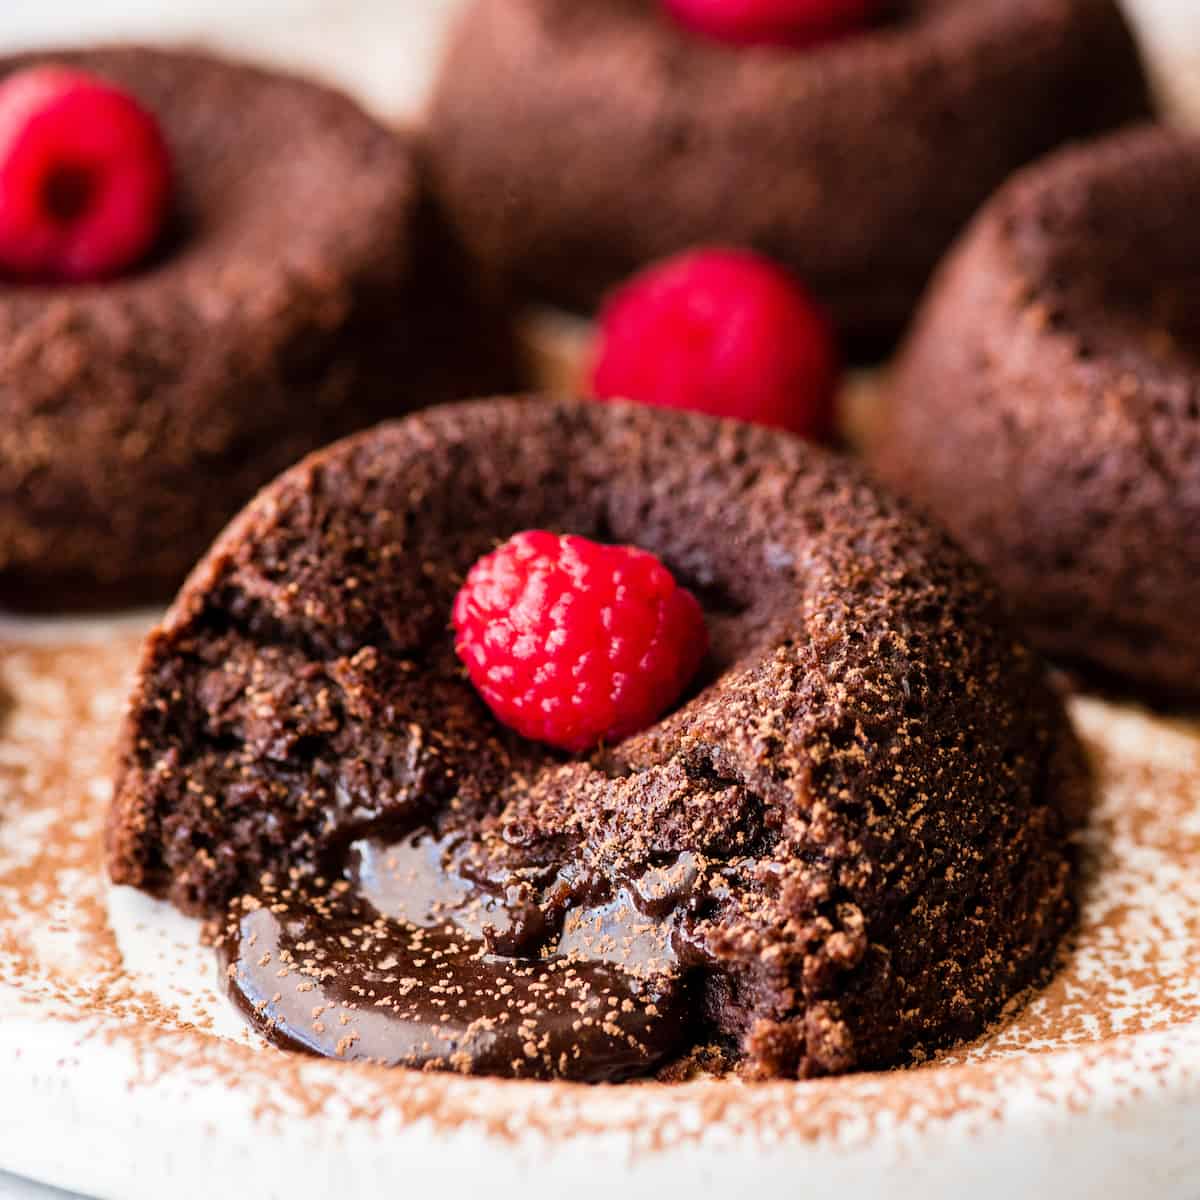 Front view of a Molten Chocolate Lava Cake oozing chocolate filling